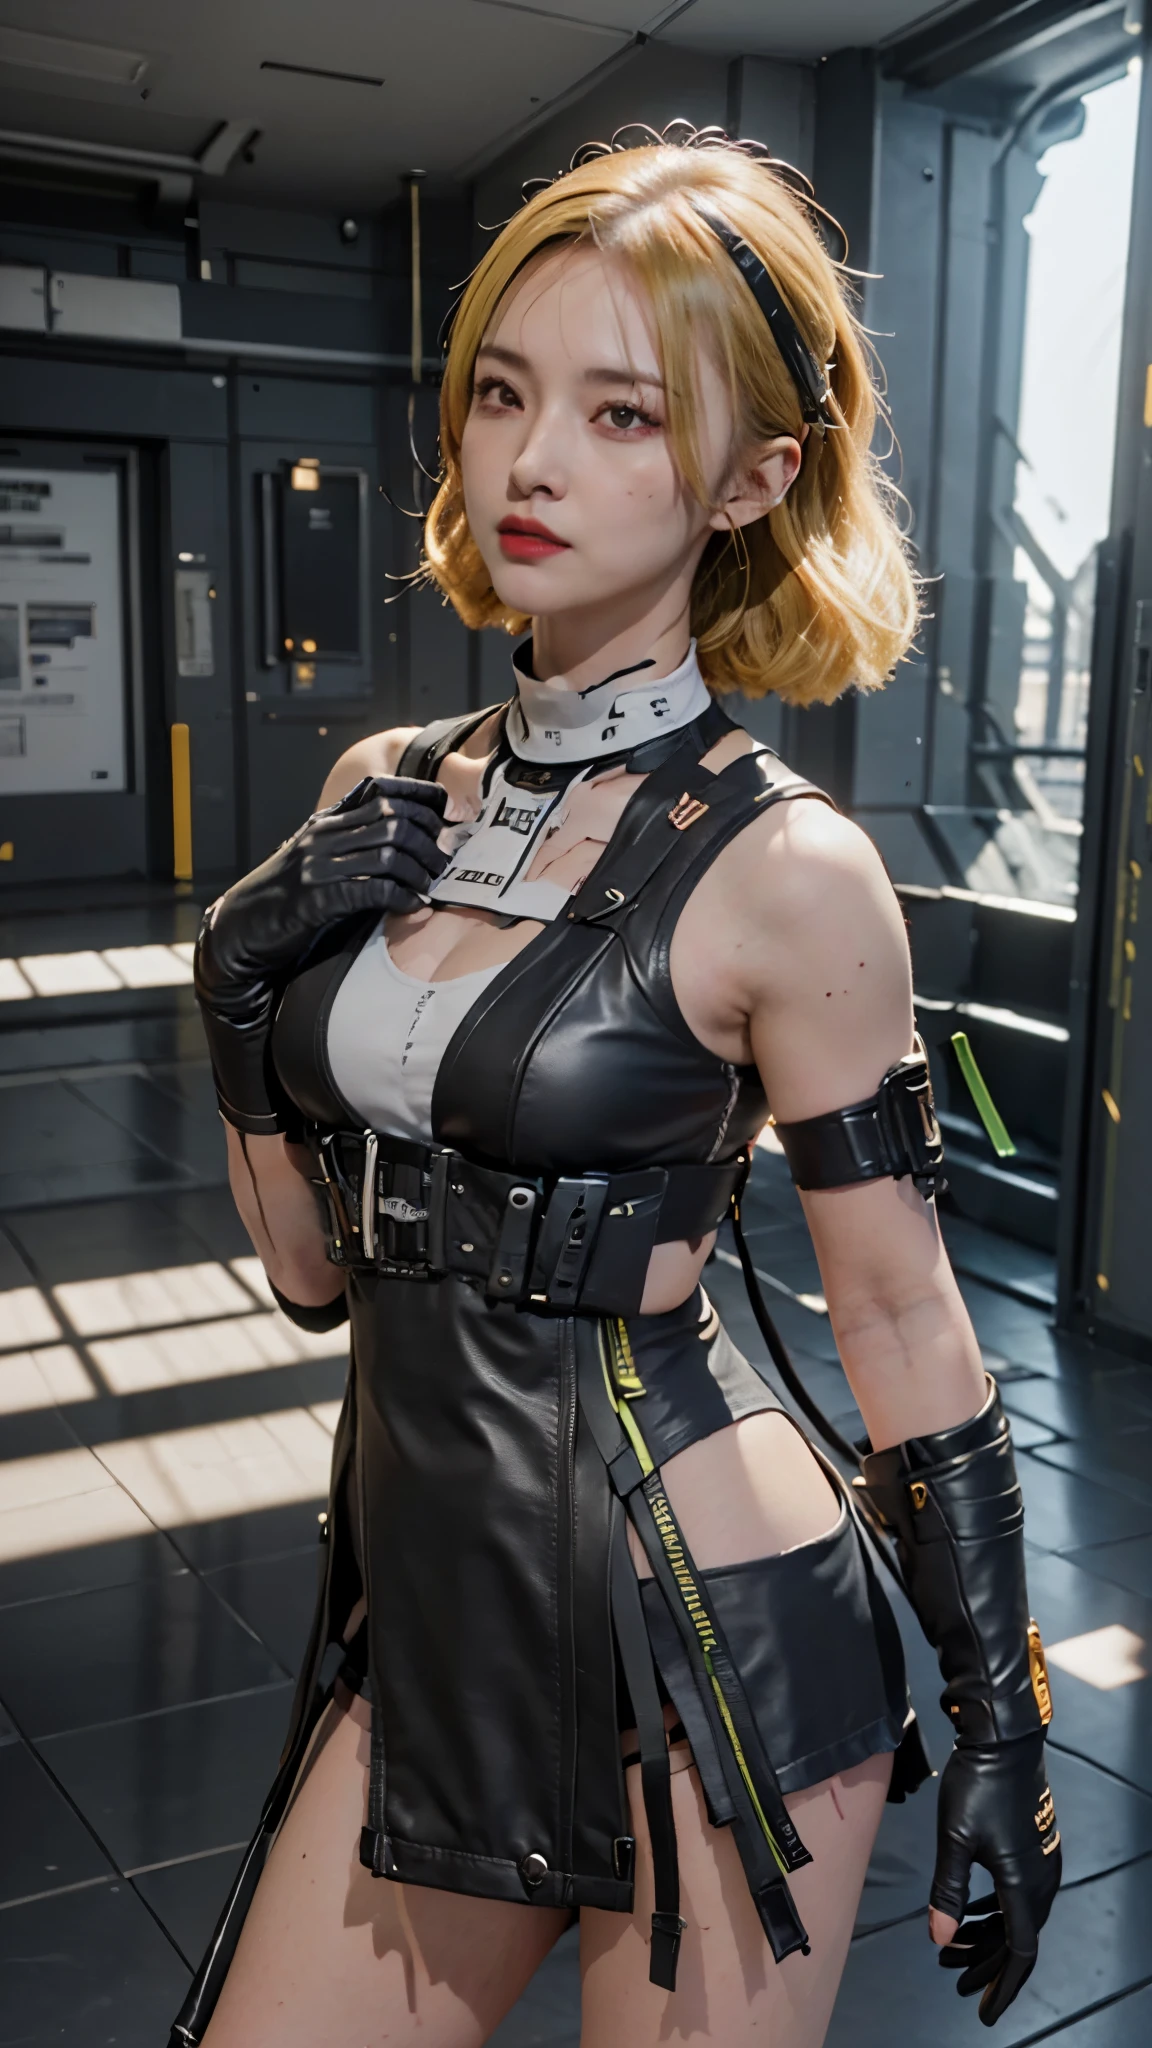 ((Best quality)), ((masterpiece)), (detailed:1.4), 3D, an image of a beautiful cyberpunk female, short yellow hair, red eyeys,HDR (High Dynamic Range),Ray Tracing,NVIDIA RTX,Super-Resolution,Unreal 5,Subsurface scattering,PBR Texturing,Post-processing,Anisotropic Filtering,Depth-of-field,Maximum clarity and sharpness,Multi-layered textures,Albedo and Specular maps,Surface shading,Accurate simulation of light-material interaction,Perfect proportions,Octane Render,Two-tone lighting,Wide aperture,Low ISO,White balance,Rule of thirds,8K RAW,